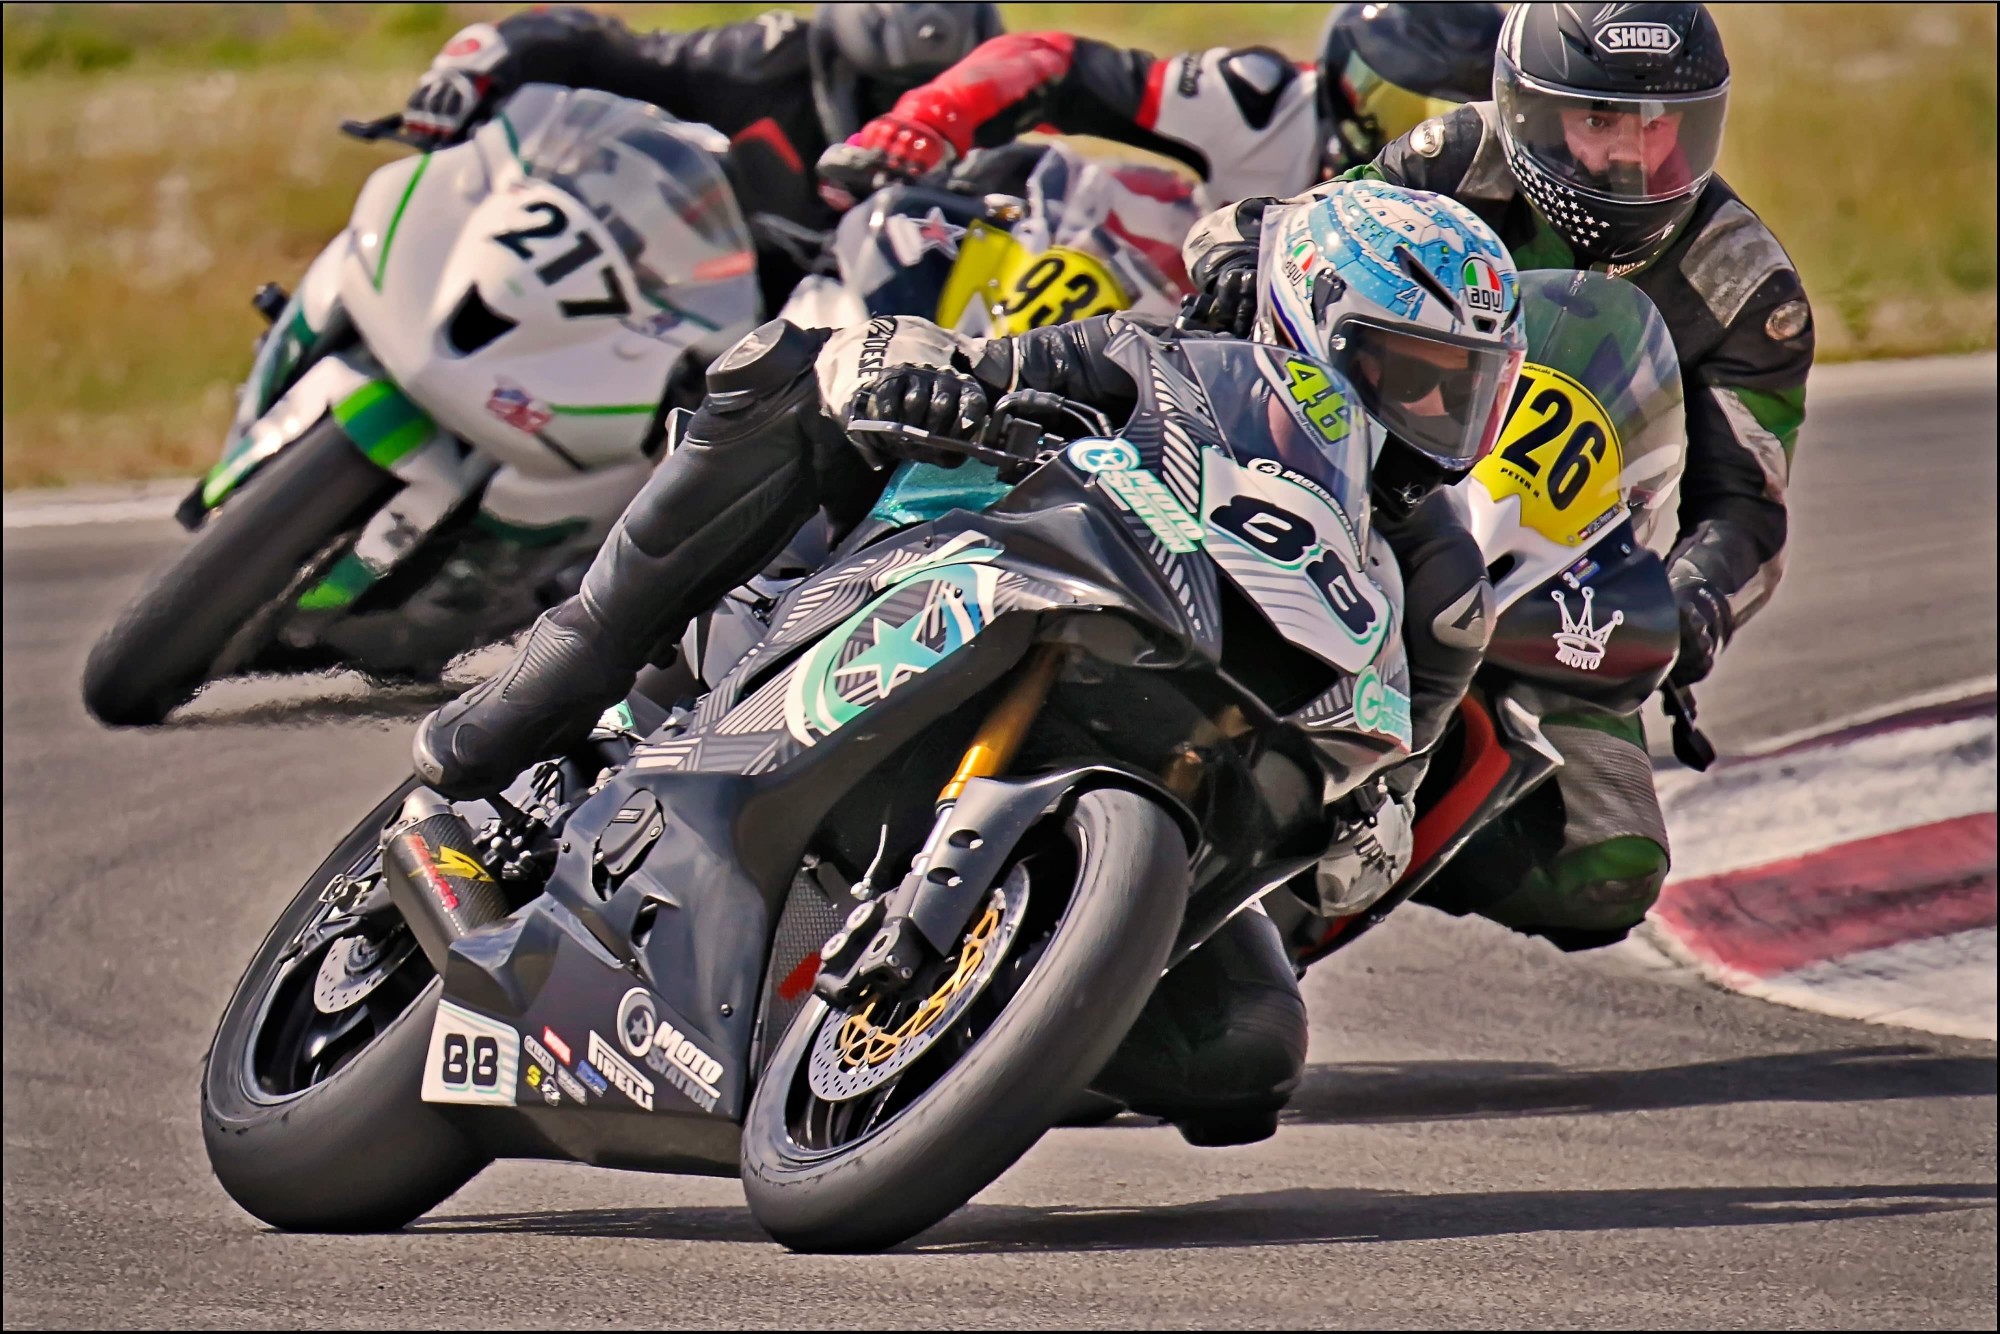 UtahSBA Releases Details About 4-Hour Endurance Scheduled For September 14 Roadracing World Magazine | Motorcycle Riding, Racing & Tech News